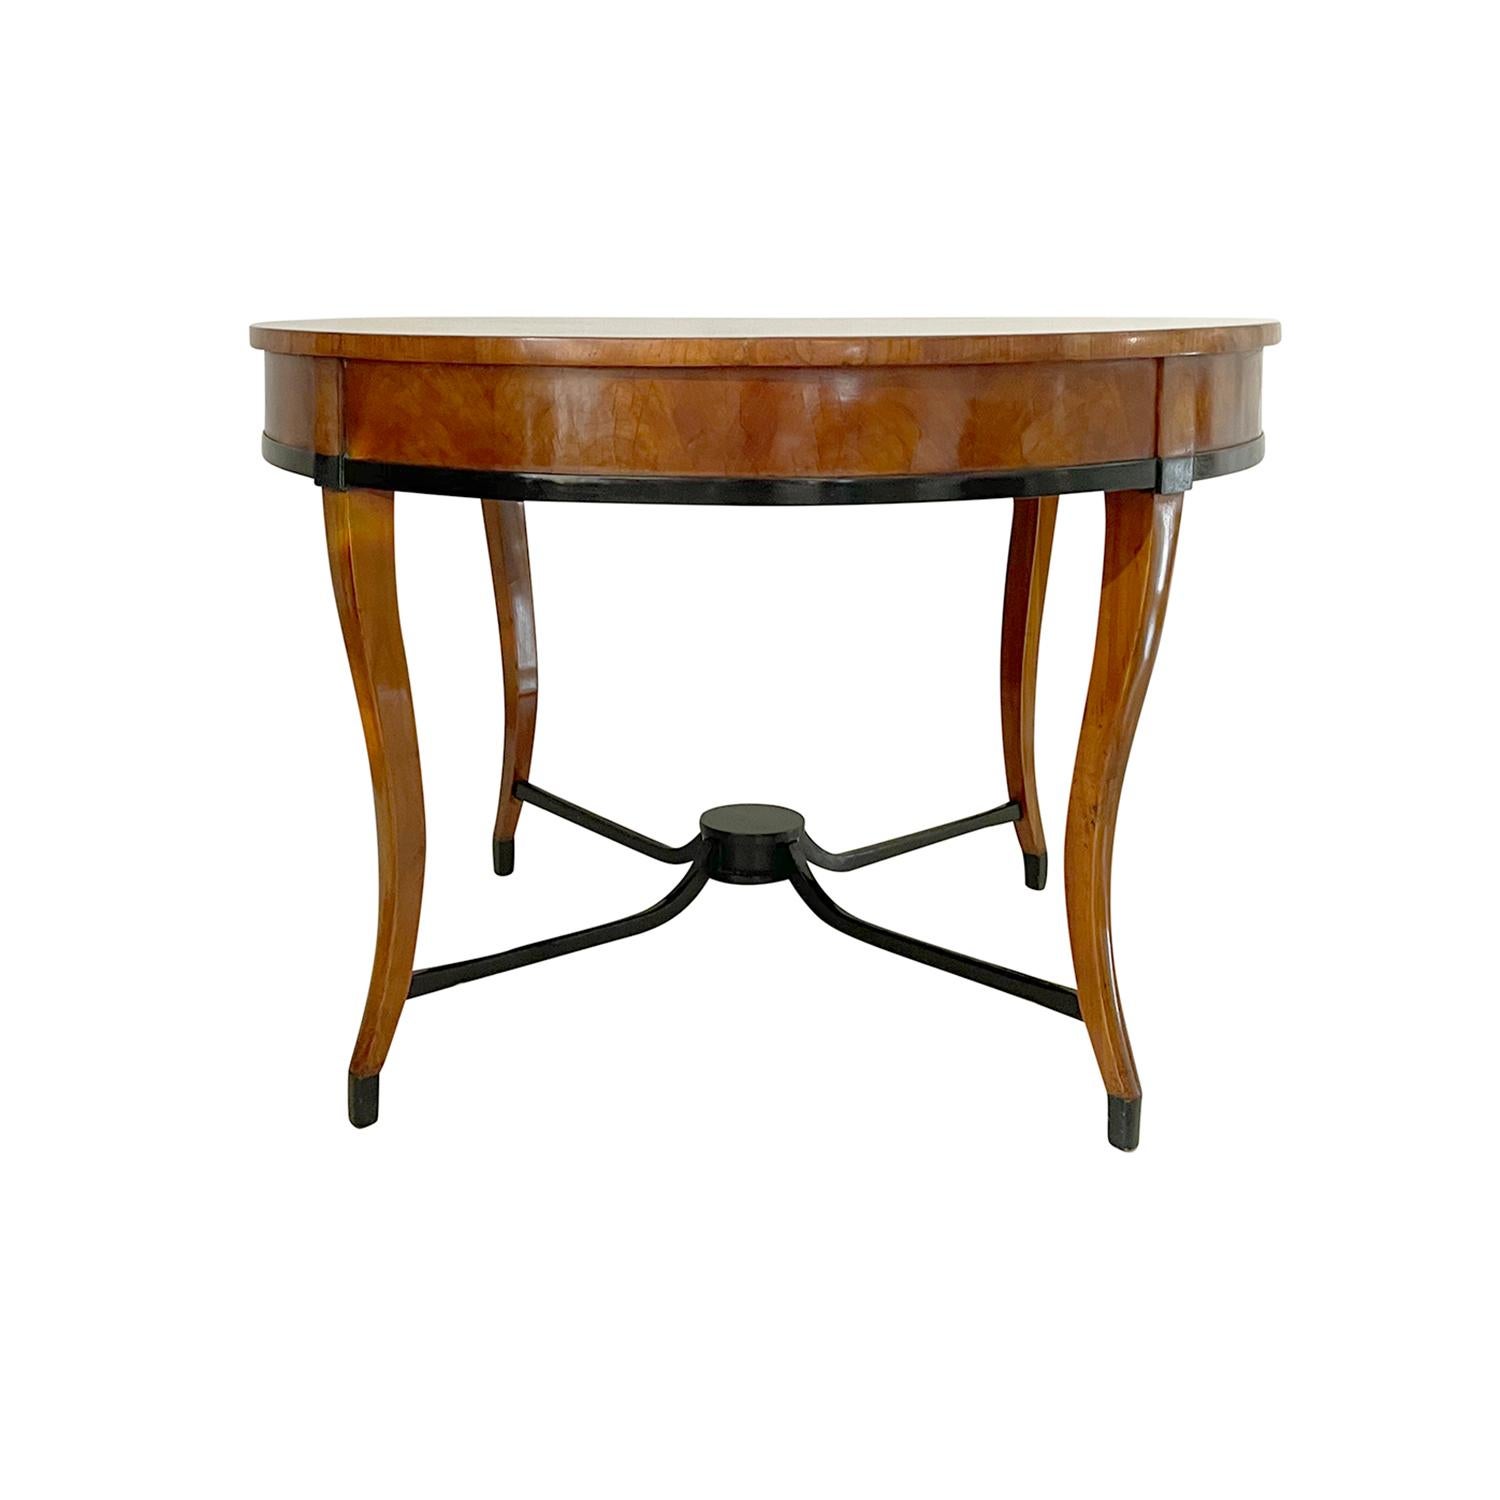 A light-brown, antique German Biedermeier dining room table made of hand crafted Cherrywood, shellac polished and partly veneered in good condition. The round center table is supported by four black ebonized cross beams, standing on four slim arched